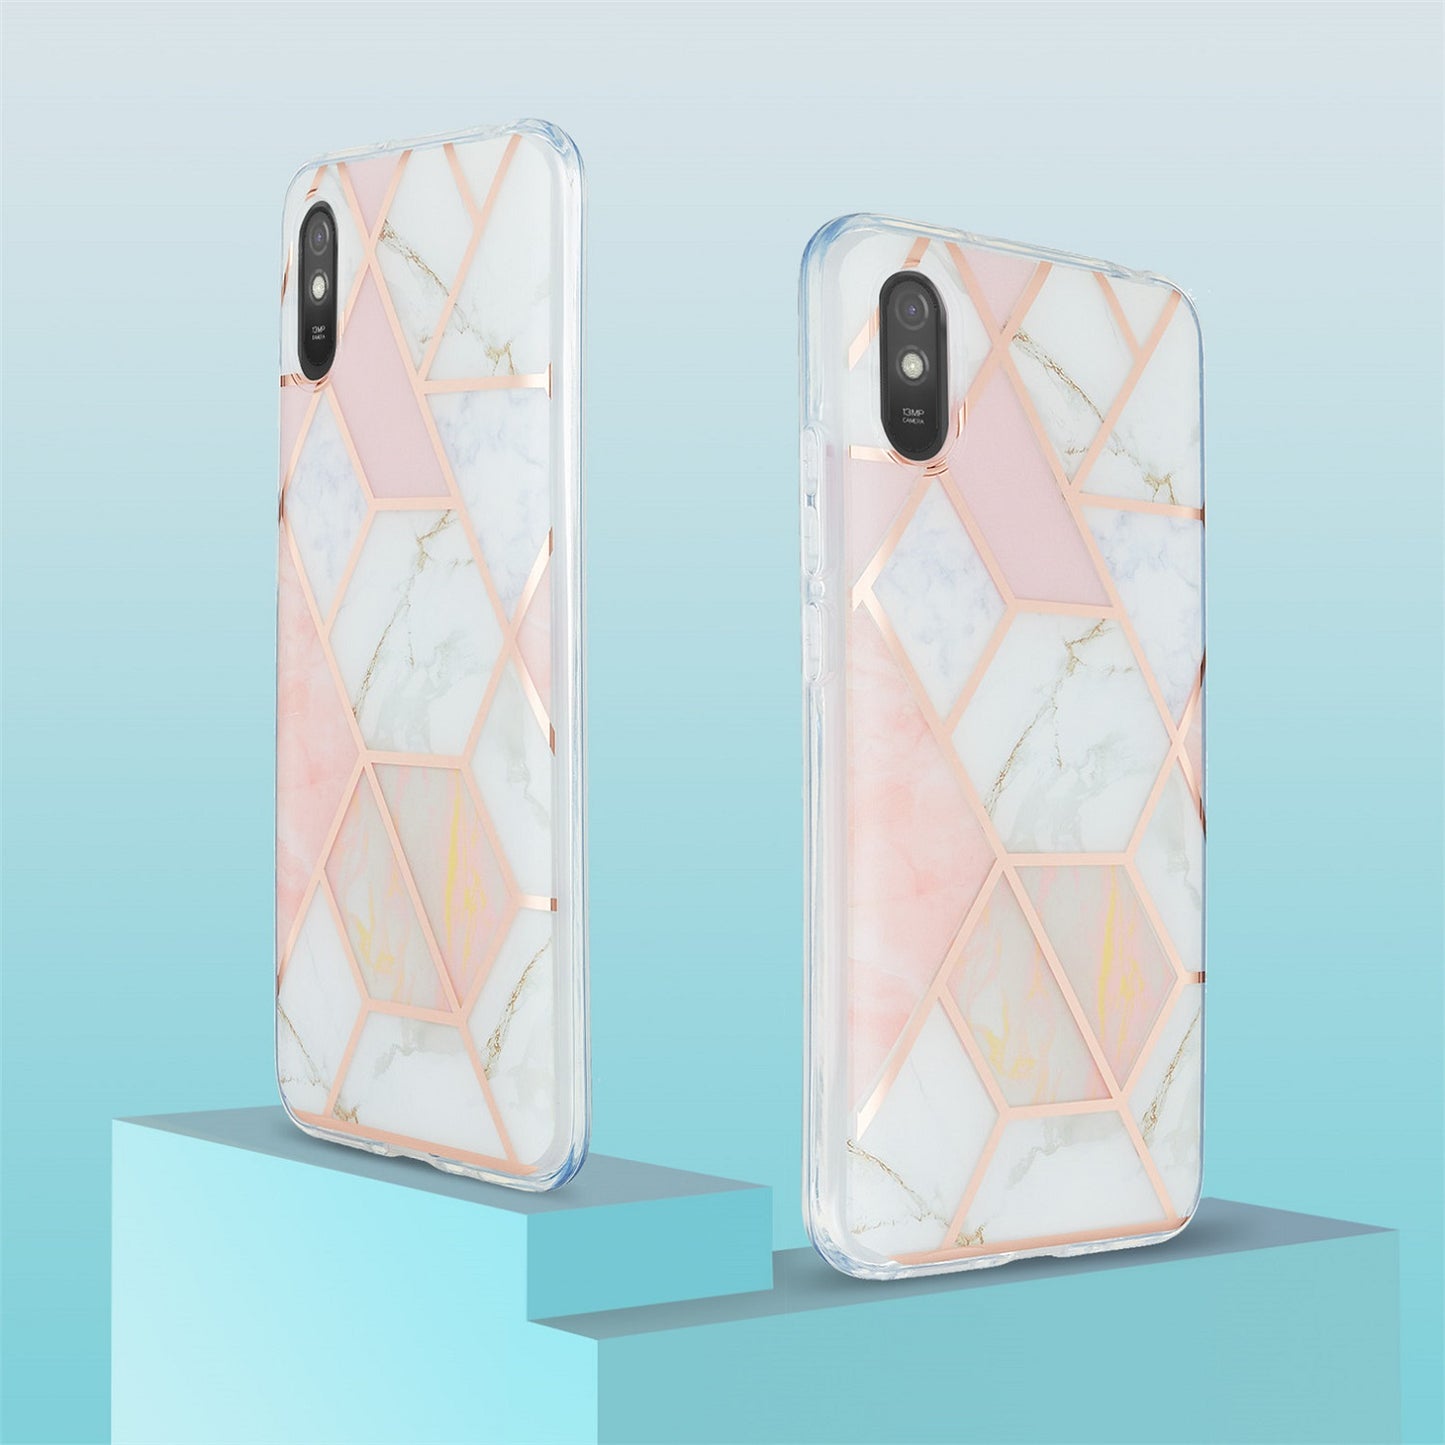 Elegant Redmi 9A back cases and covers (Geo Pink)